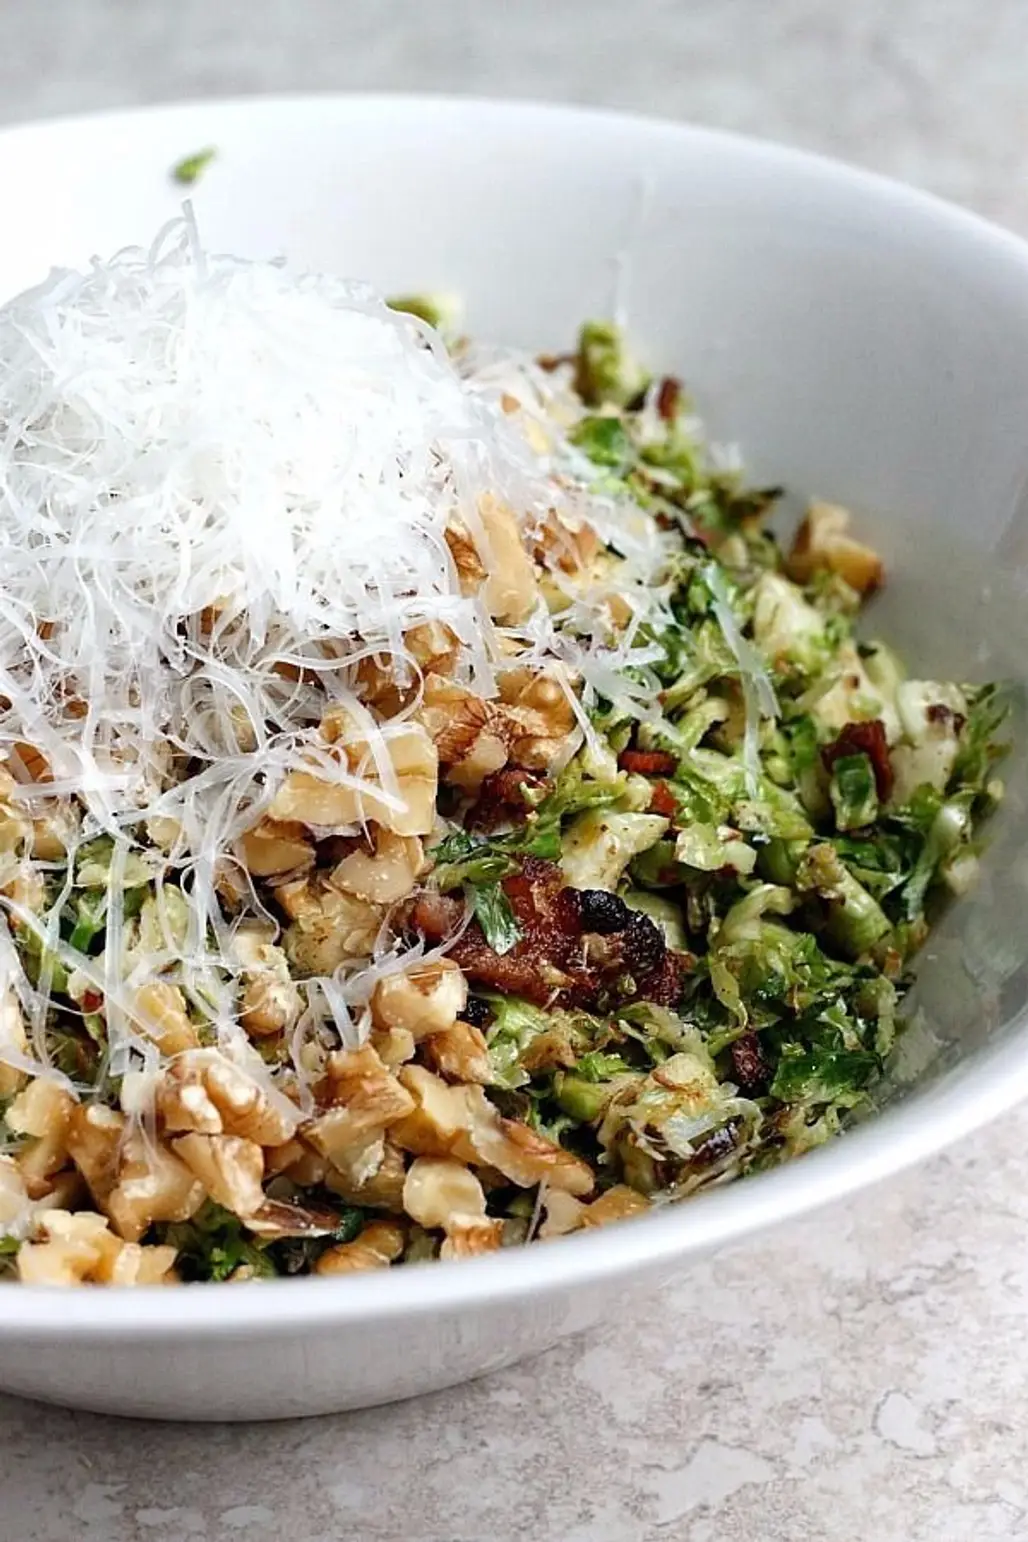 Warm Bacon and Brussels Sprouts Shredded Salad Tossed with Chopped Walnuts and Fresh Parmesan